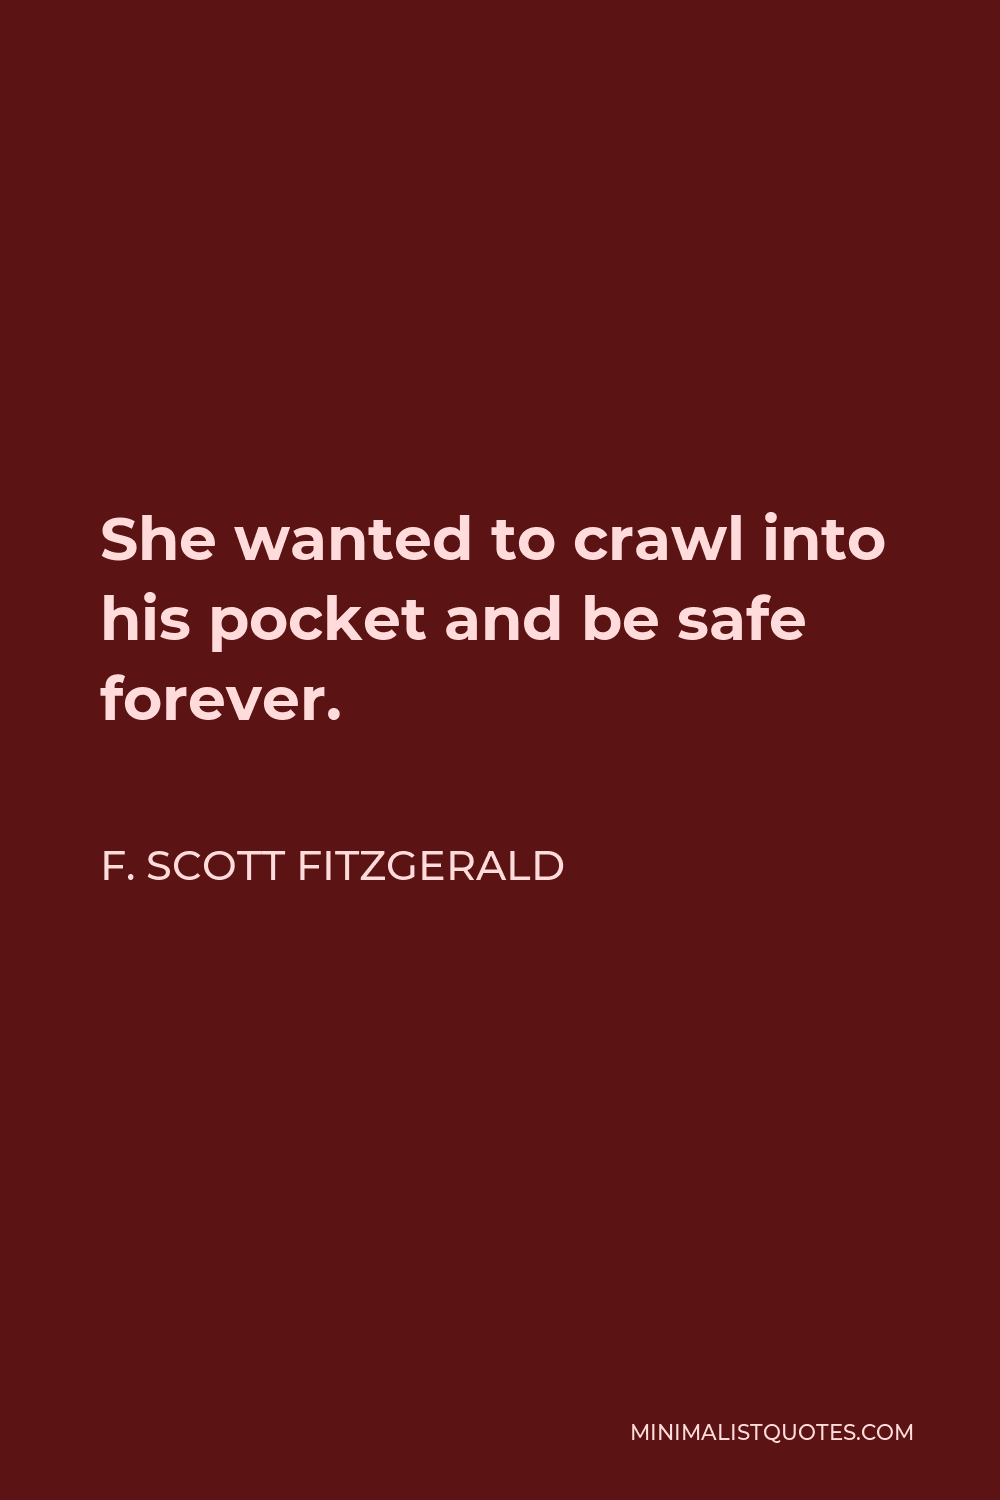 F. Scott Fitzgerald Quote - She wanted to crawl into his pocket and be safe forever.